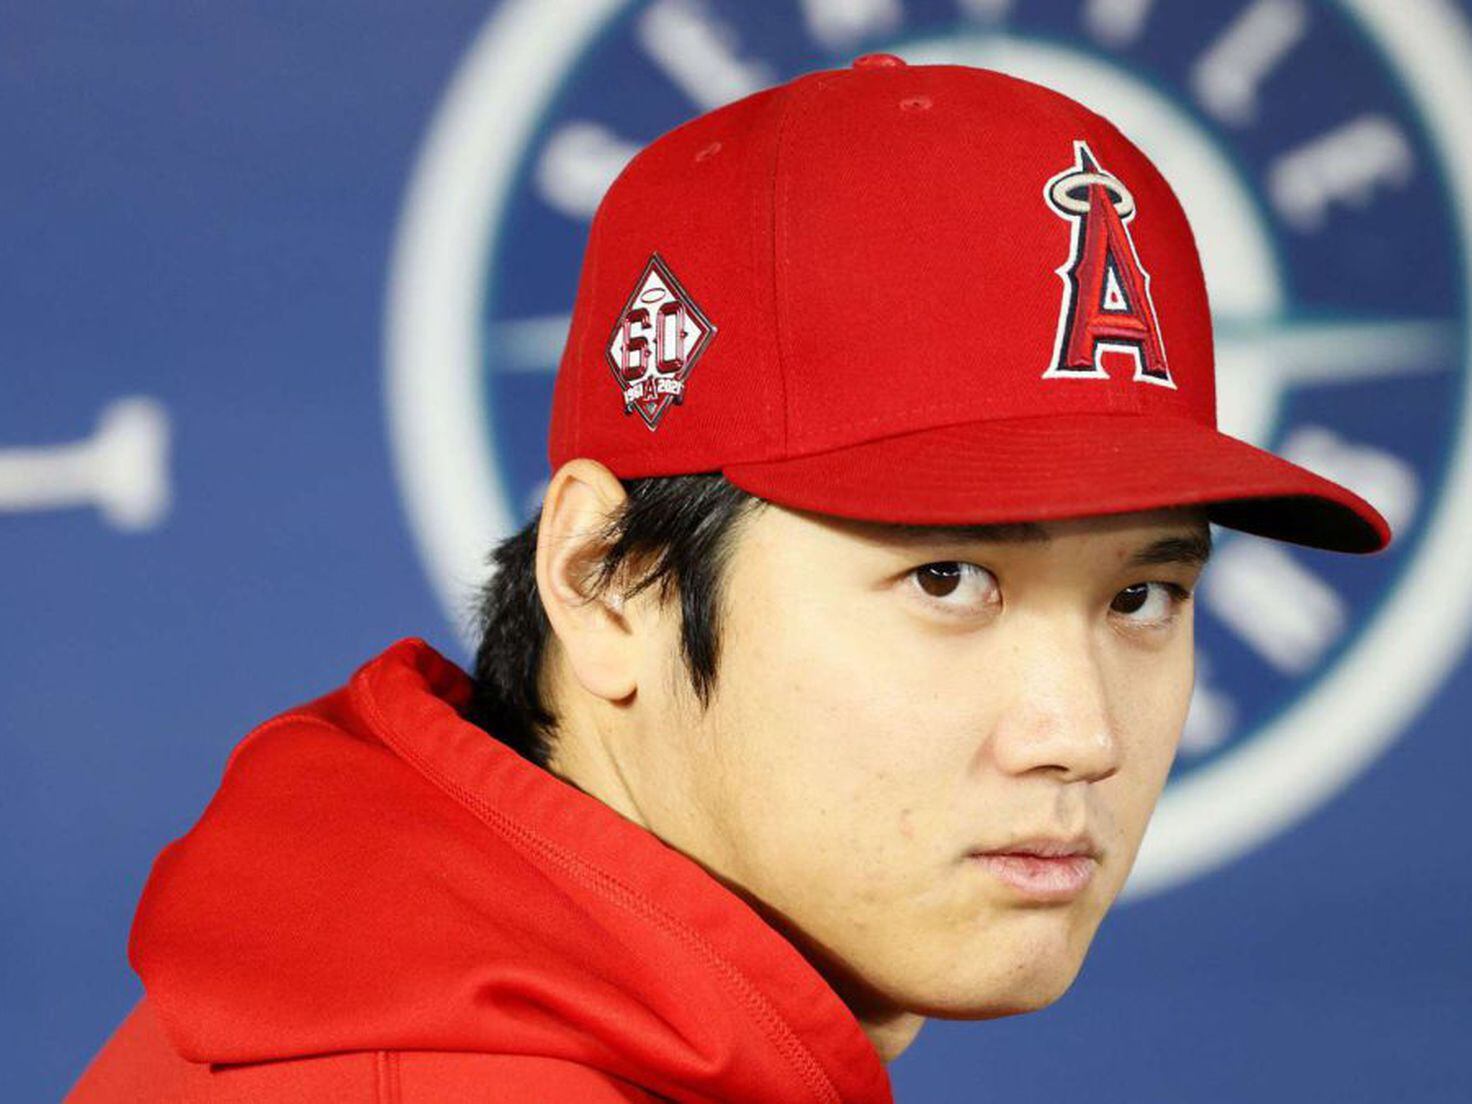 When will Shohei Ohtani become a free agent? - Quora